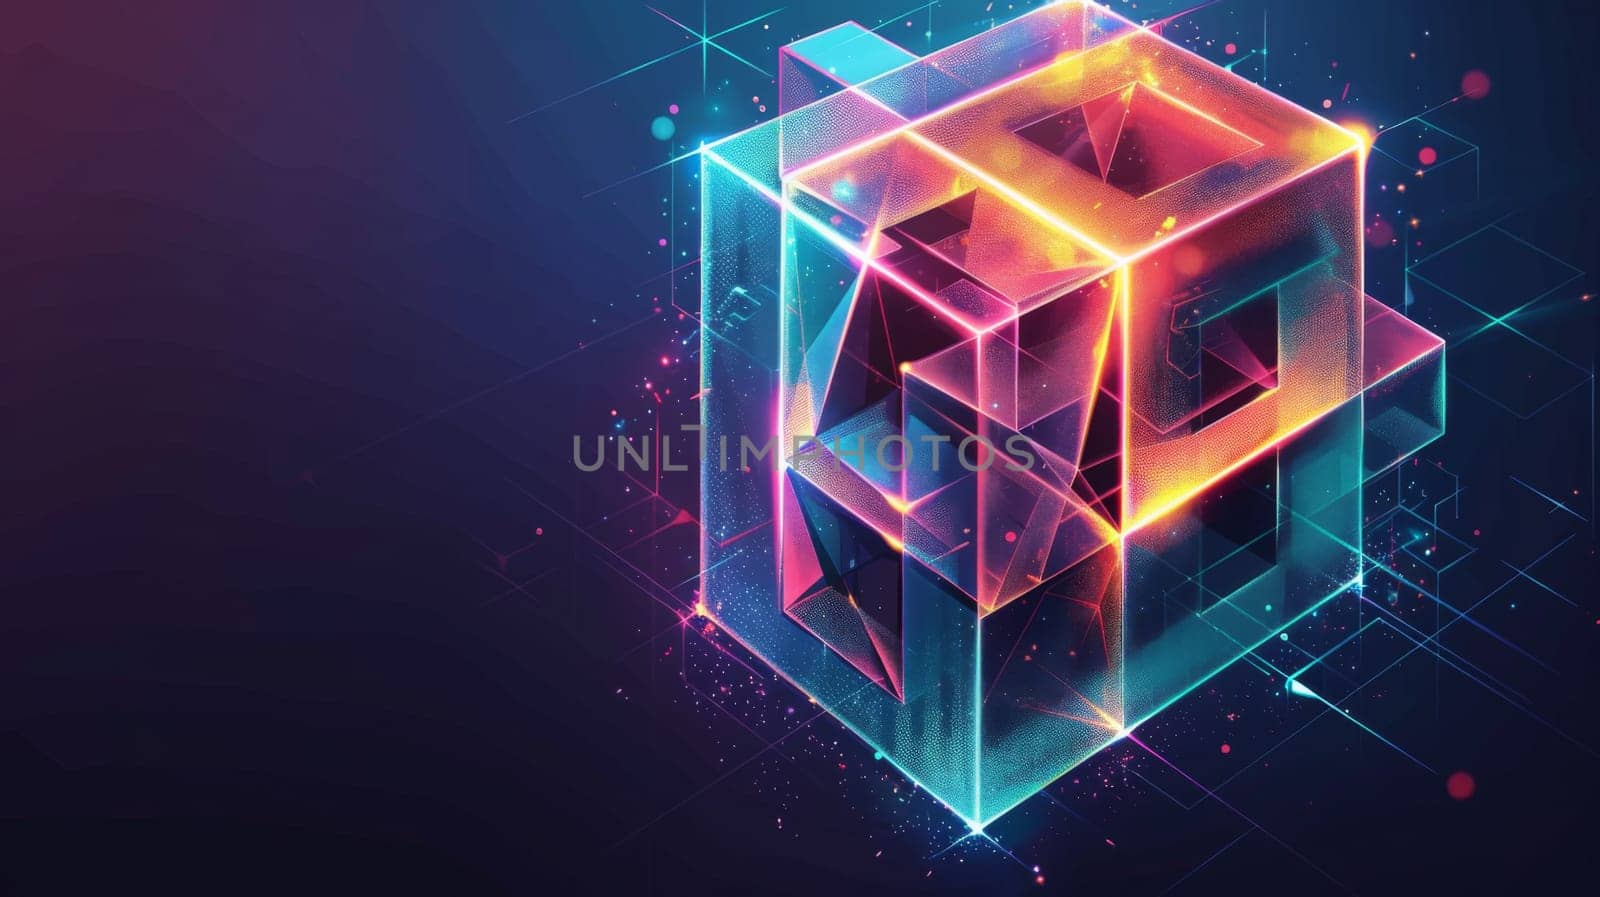 A colorful abstract image of a cube with neon lights, AI by starush